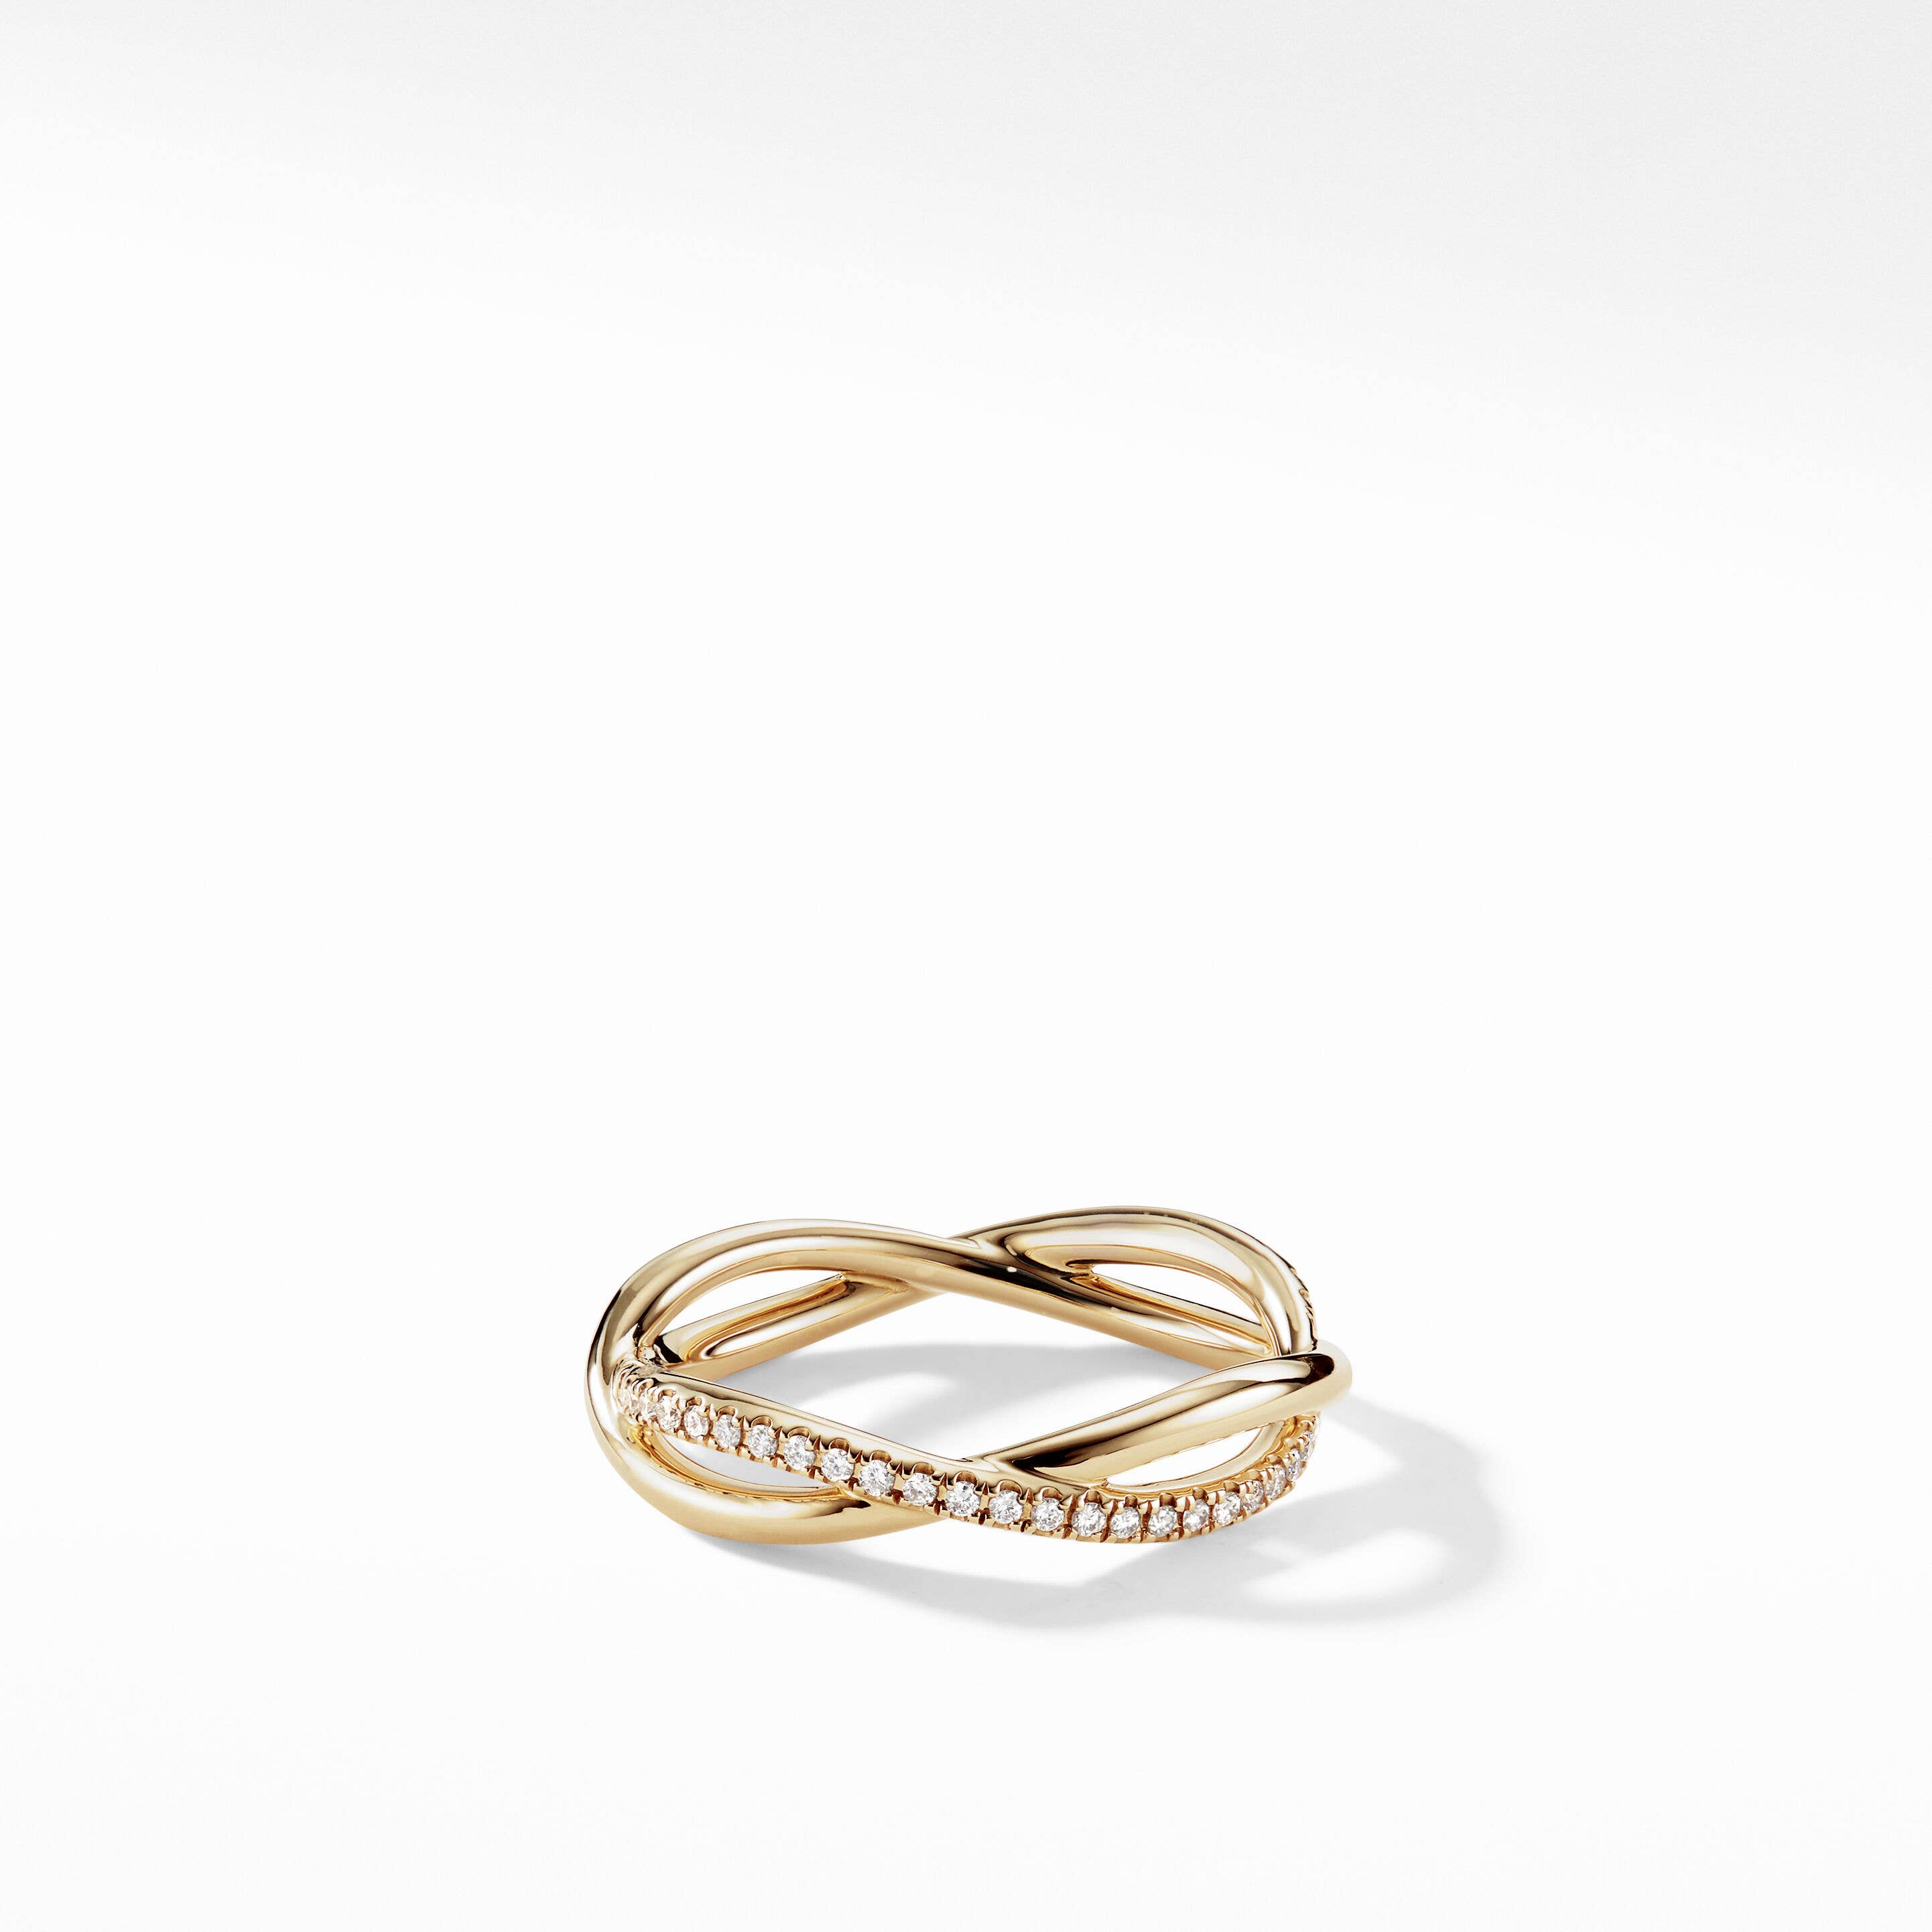 DY Lanai Band Ring in 18K Yellow Gold with Pavé Diamonds